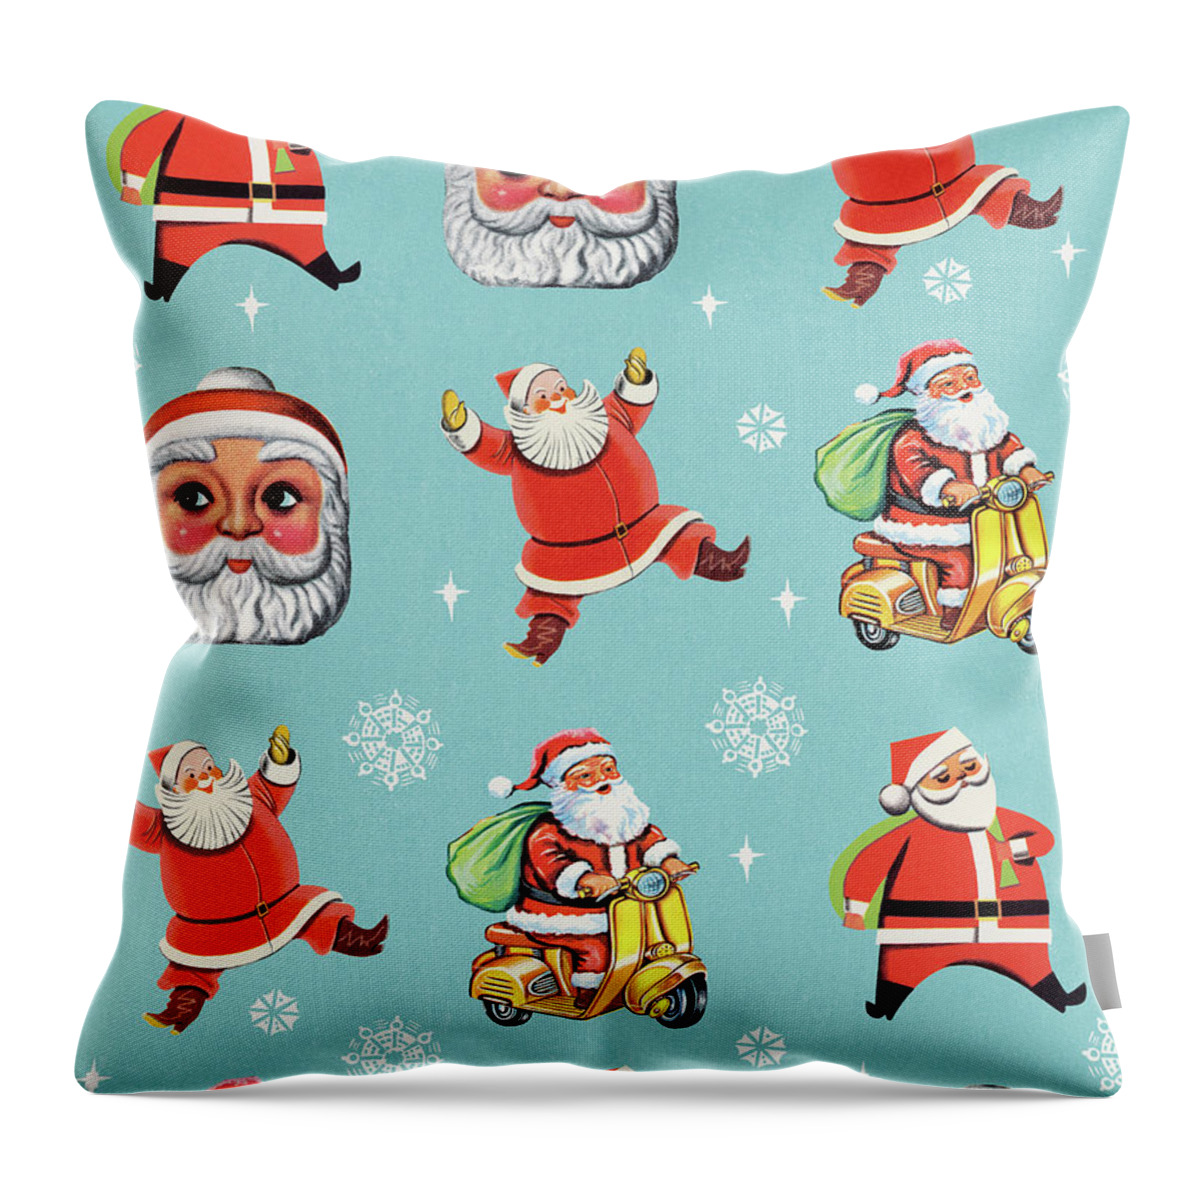 Background Throw Pillow featuring the drawing Santa Pattern With Snowflakes by CSA Images